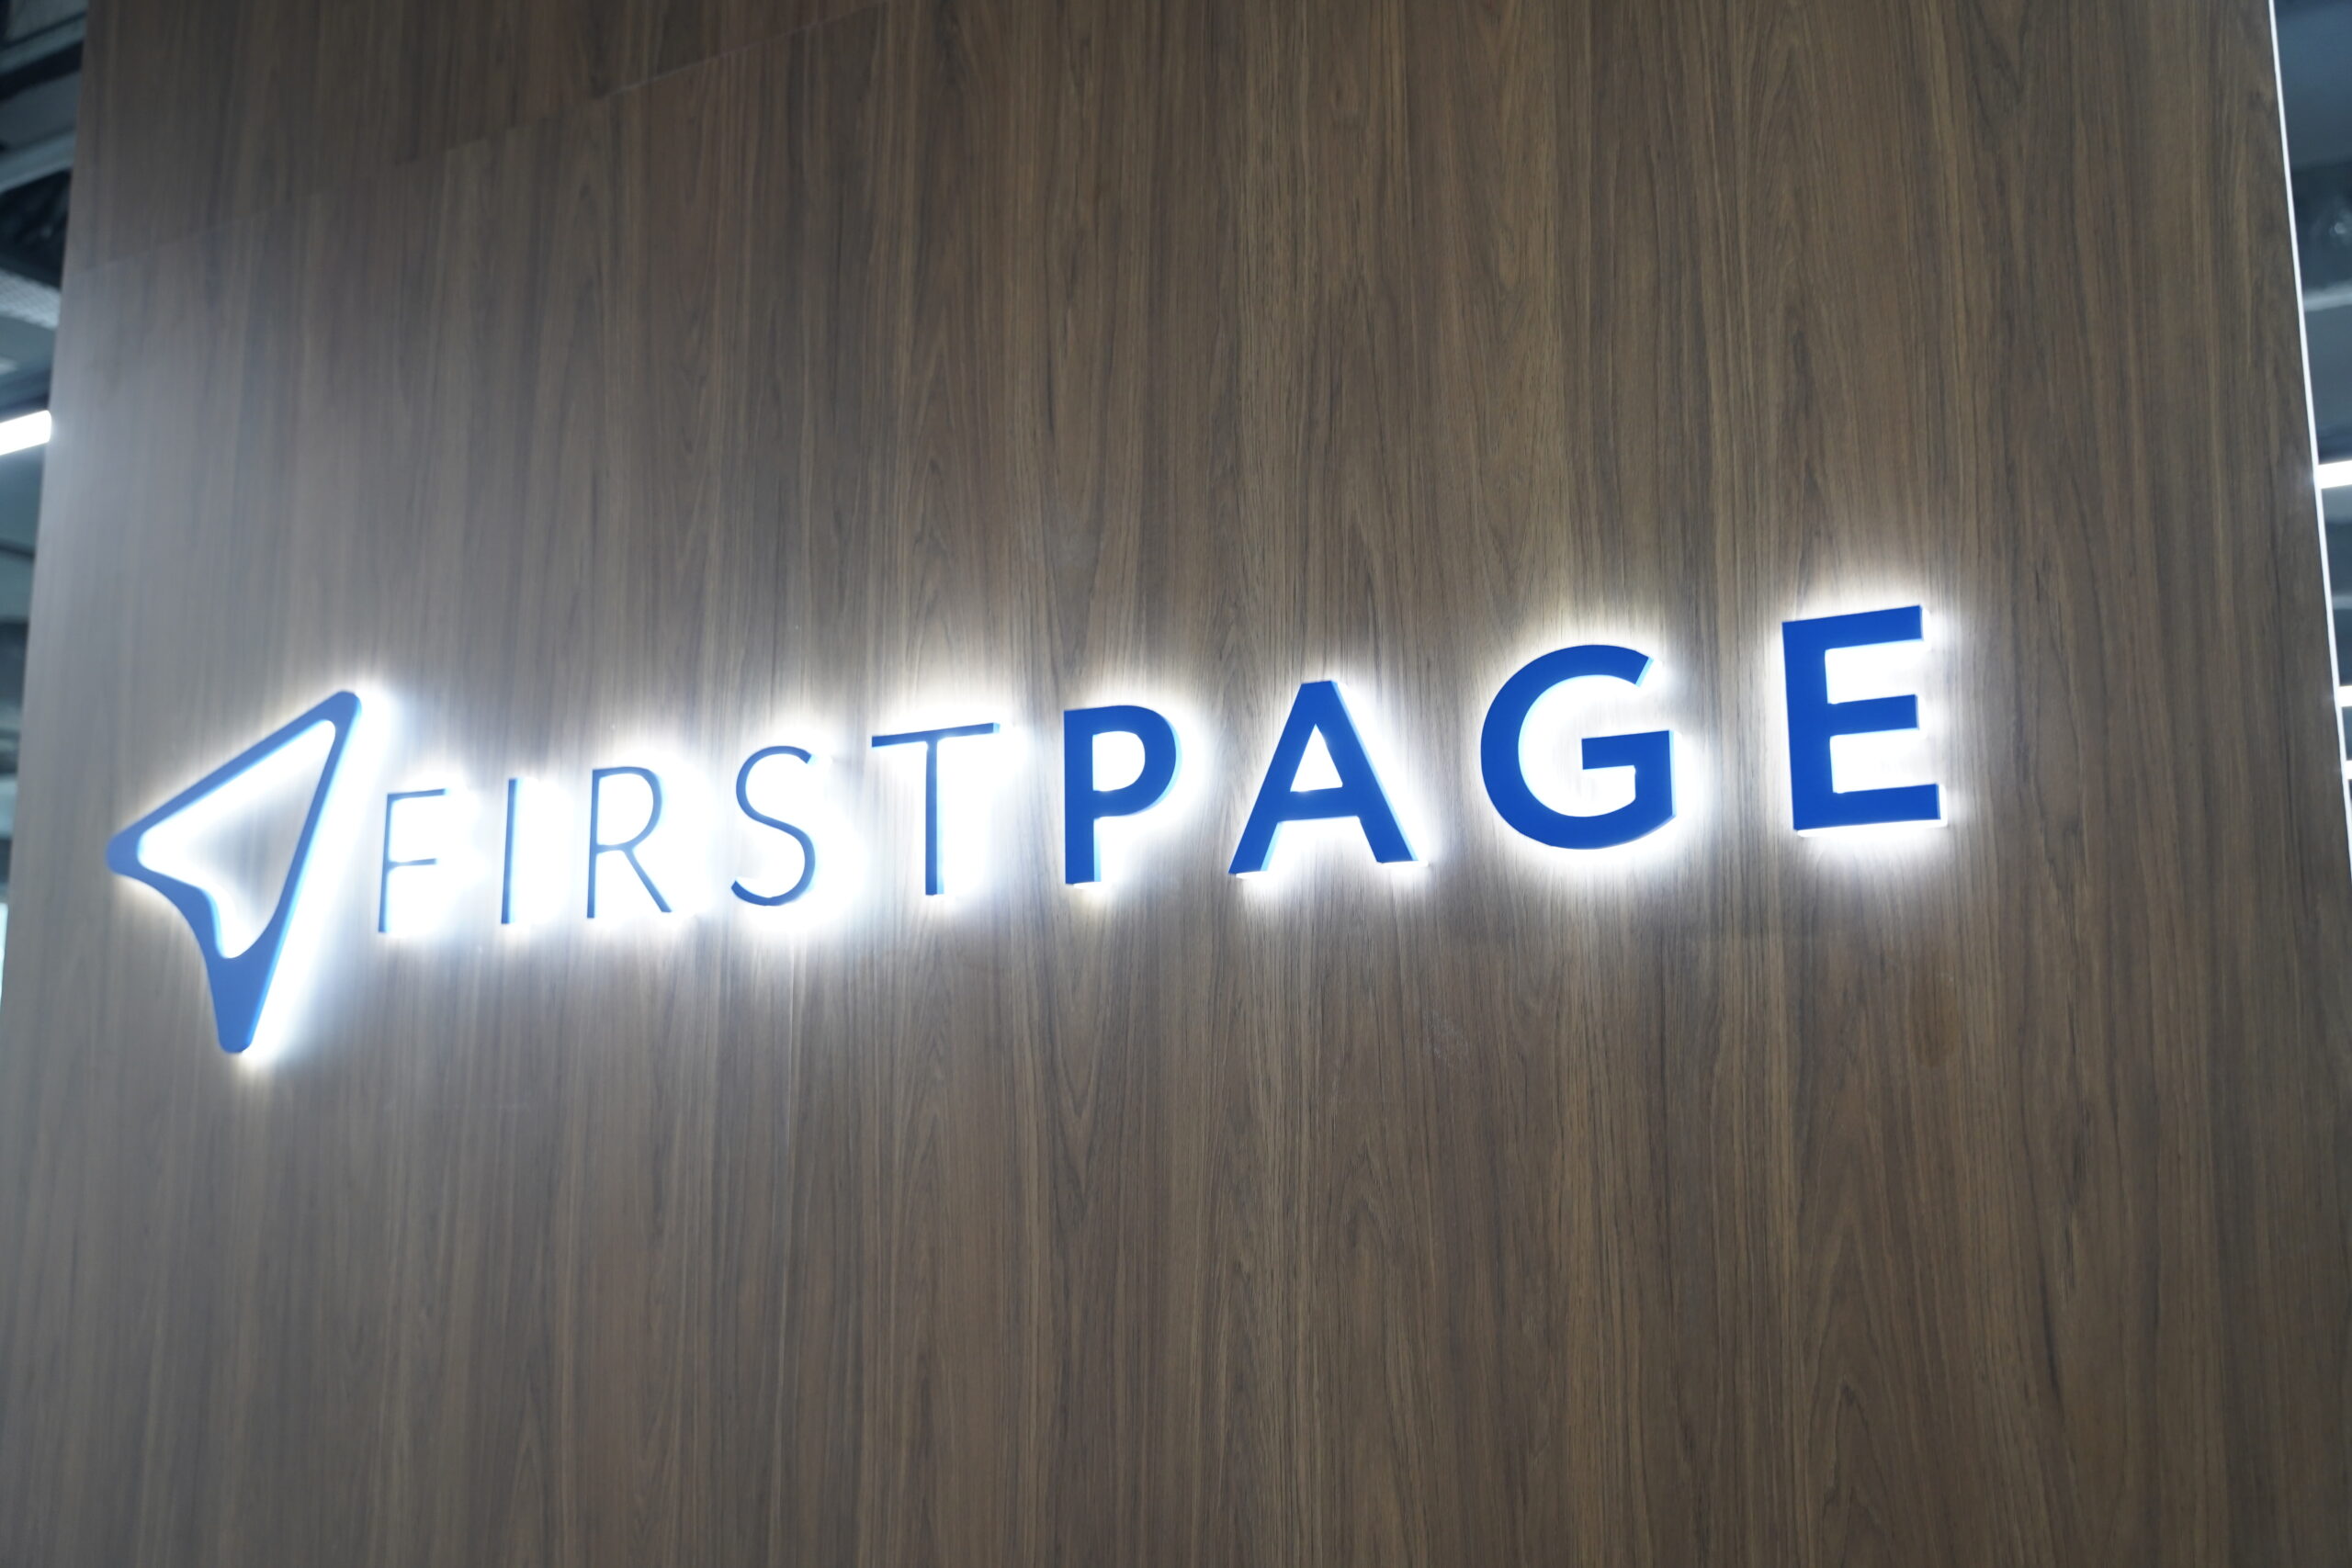 Consider First Page's SEO services to rise to the top of Google's rankings